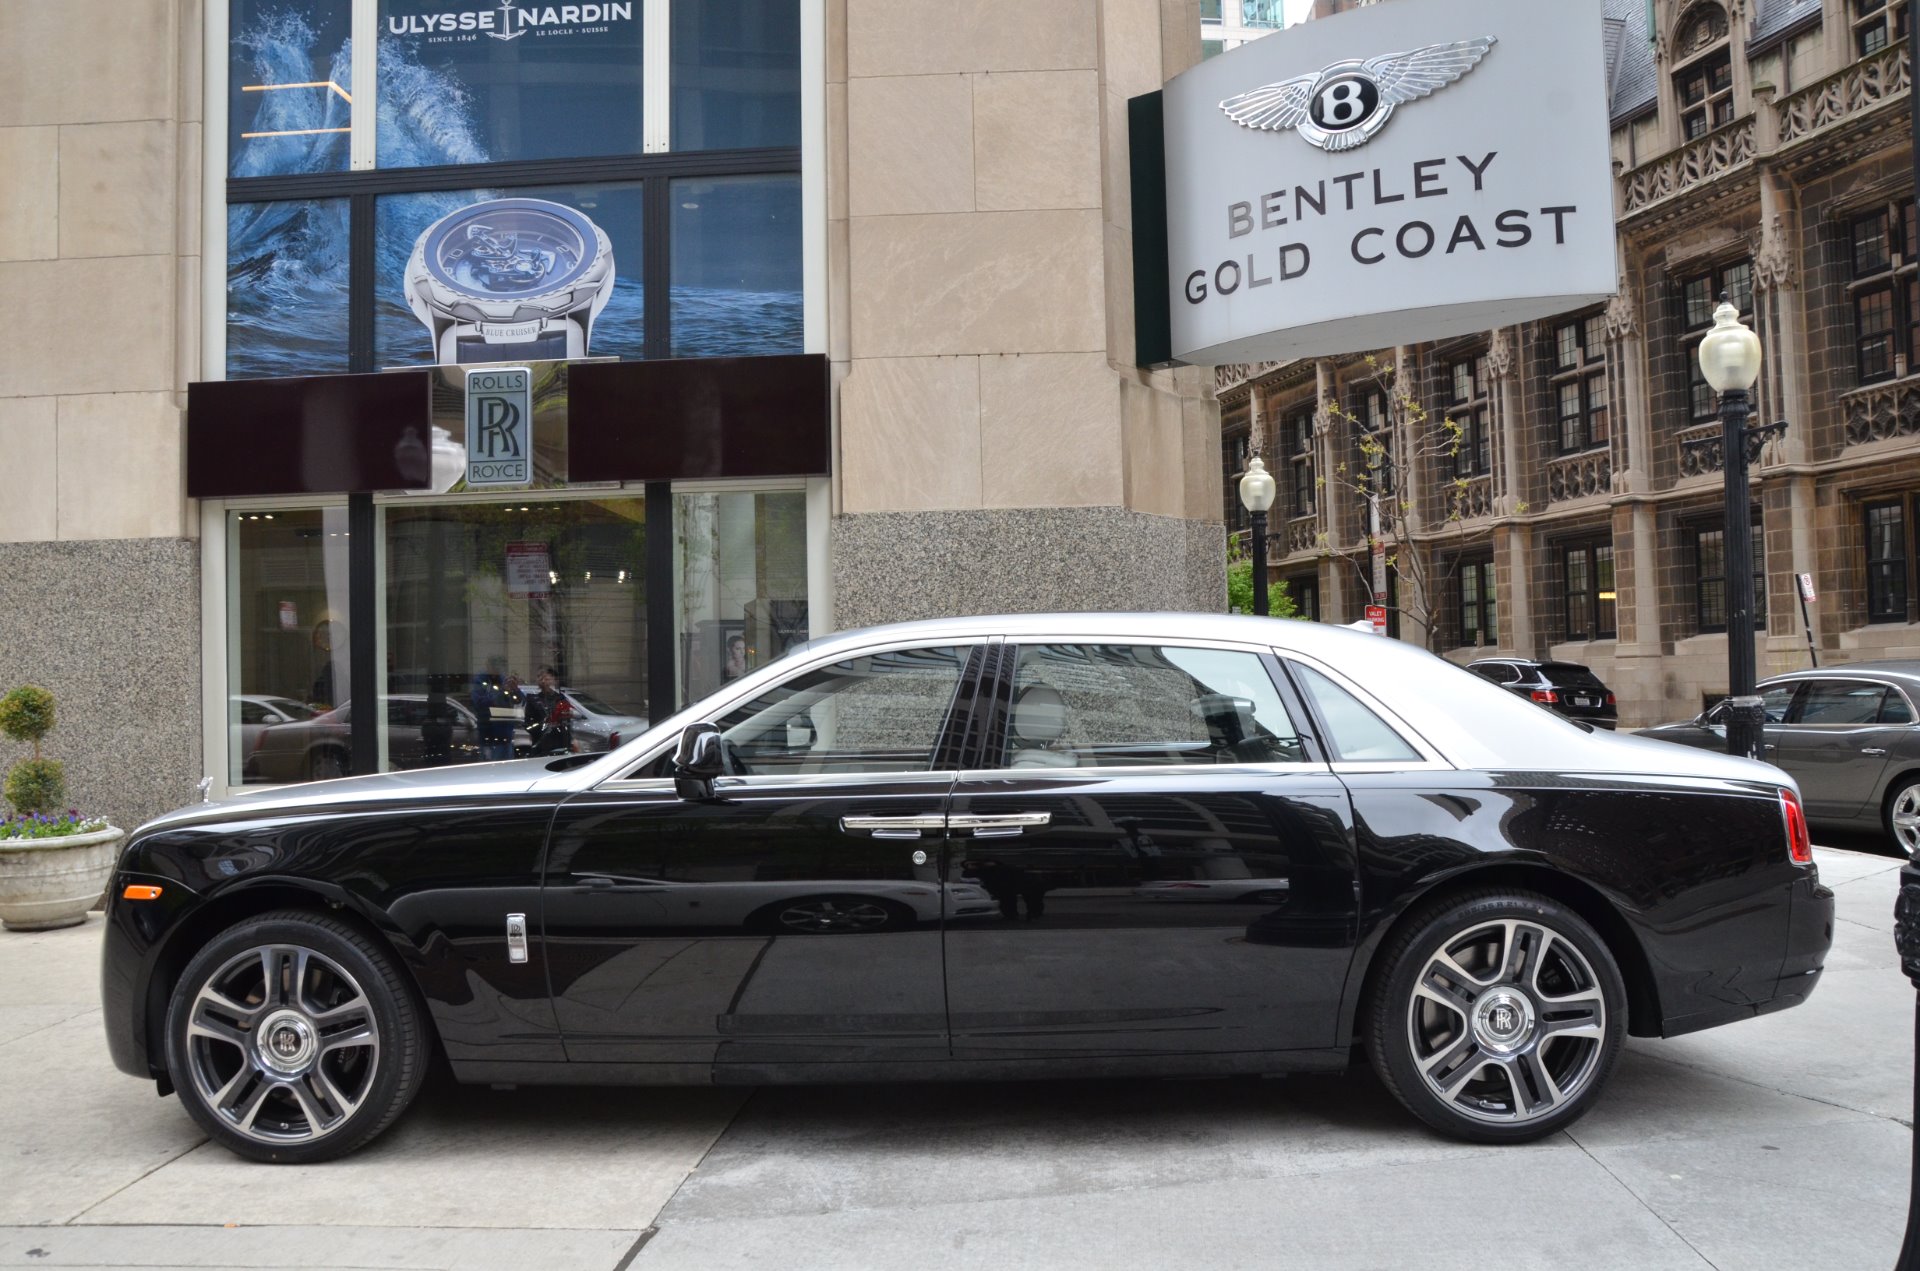 New 2017 RollsRoyce Ghost Extended Wheelbase EWB For Sale Sold  Bentley  Gold Coast Chicago Stock R405S